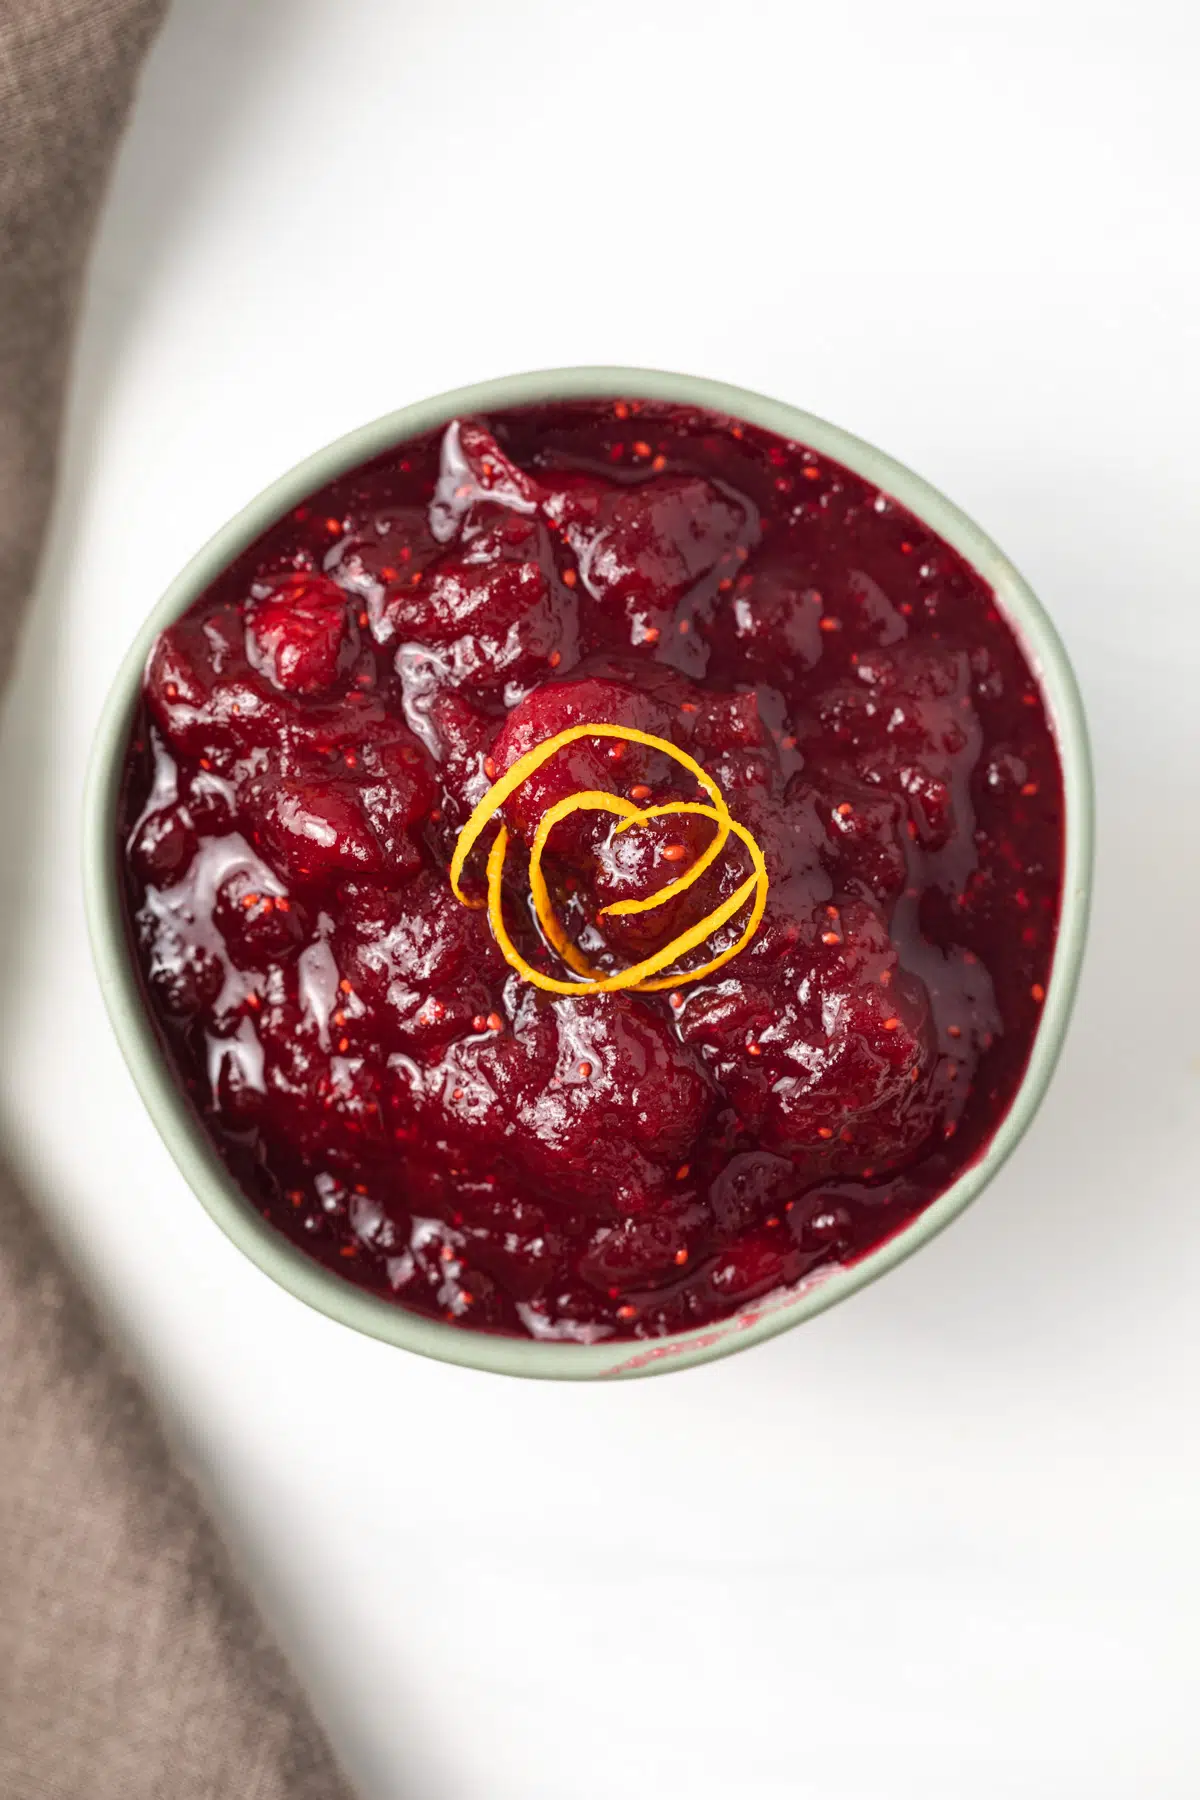 Overhead of cranberry sauce in green bowl.